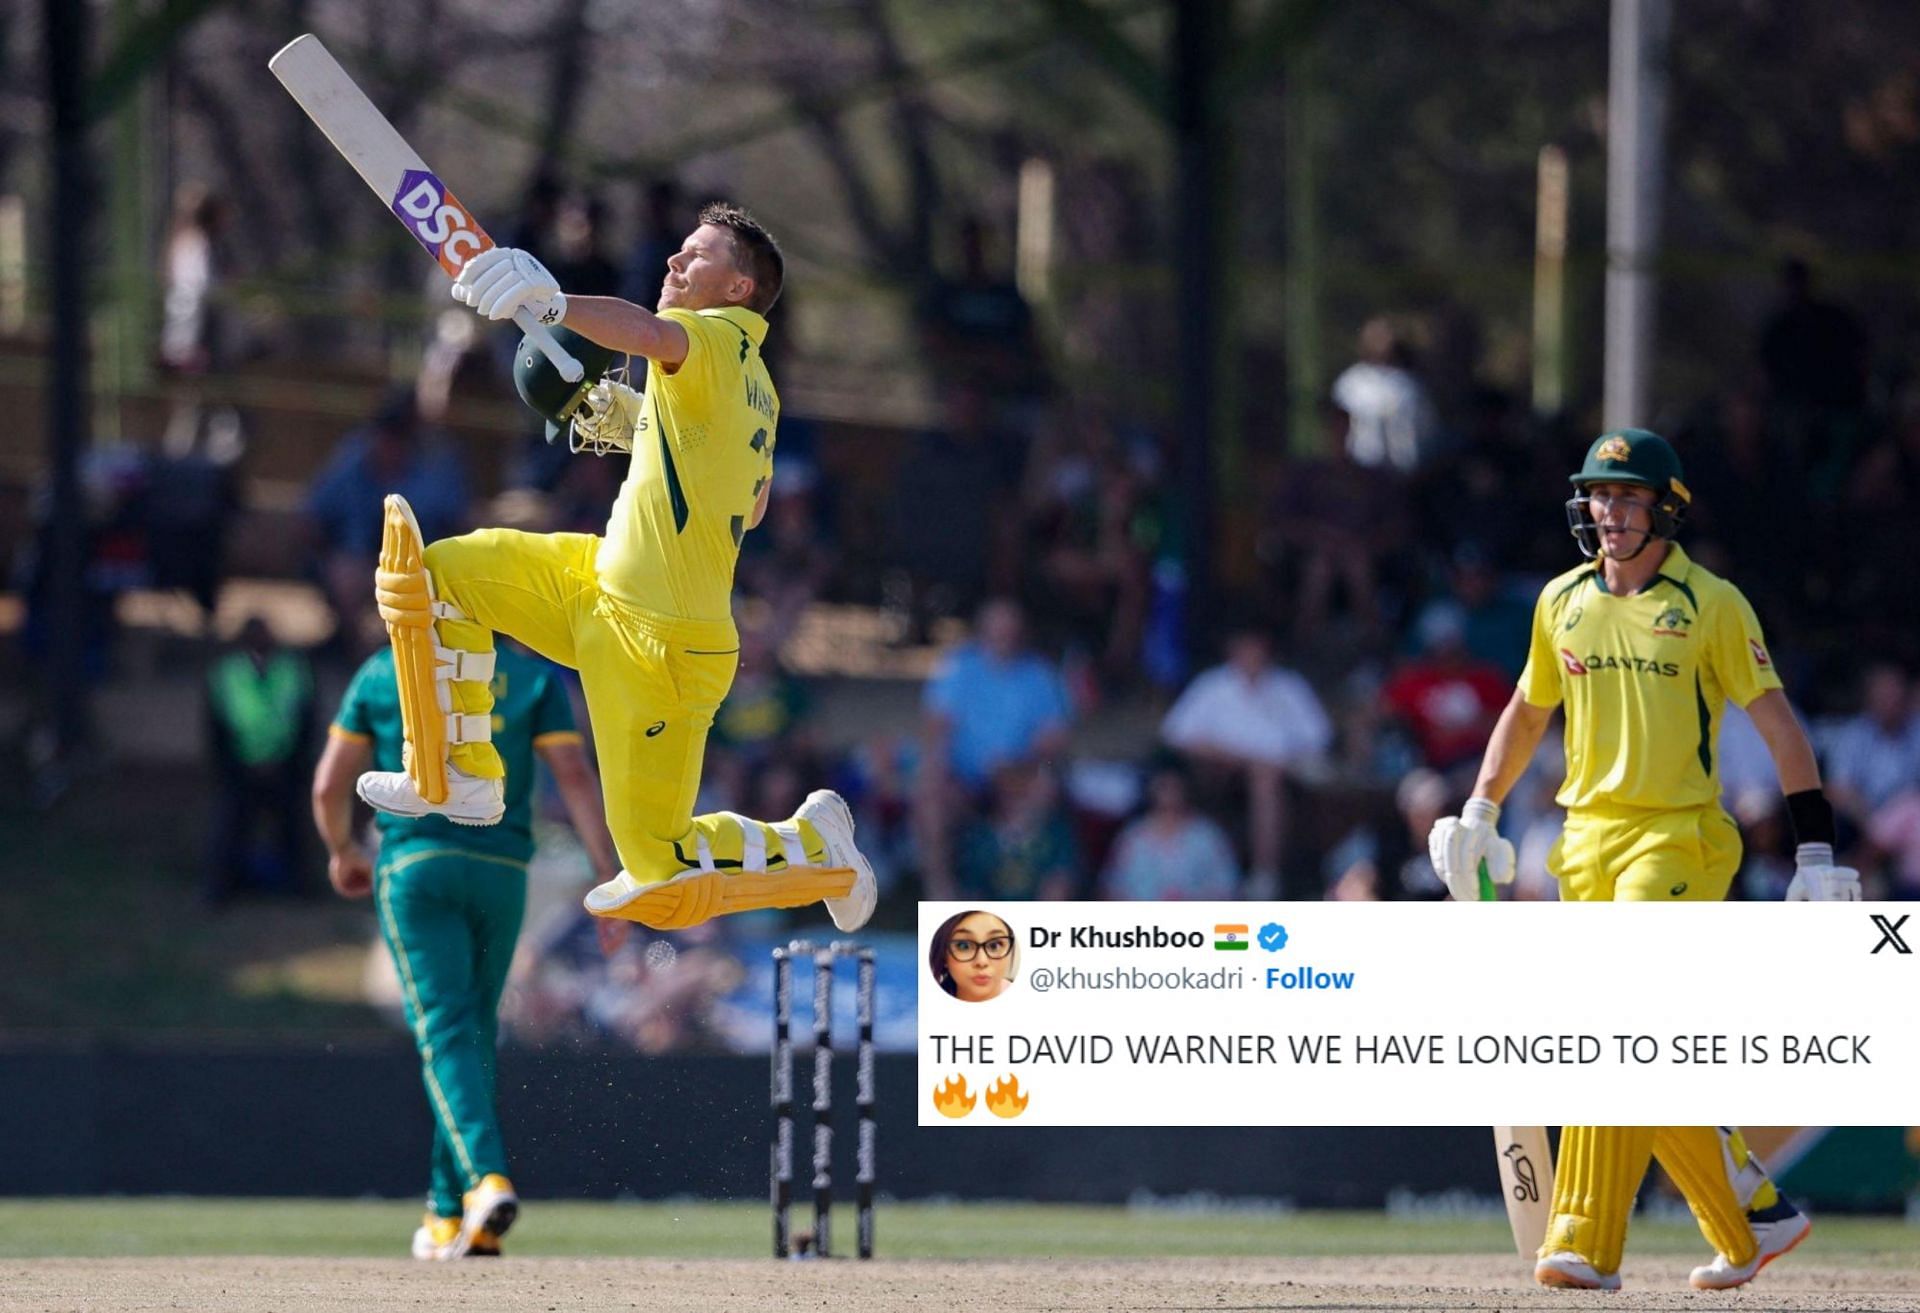 Fans react after David Warner hit a century on Saturday.